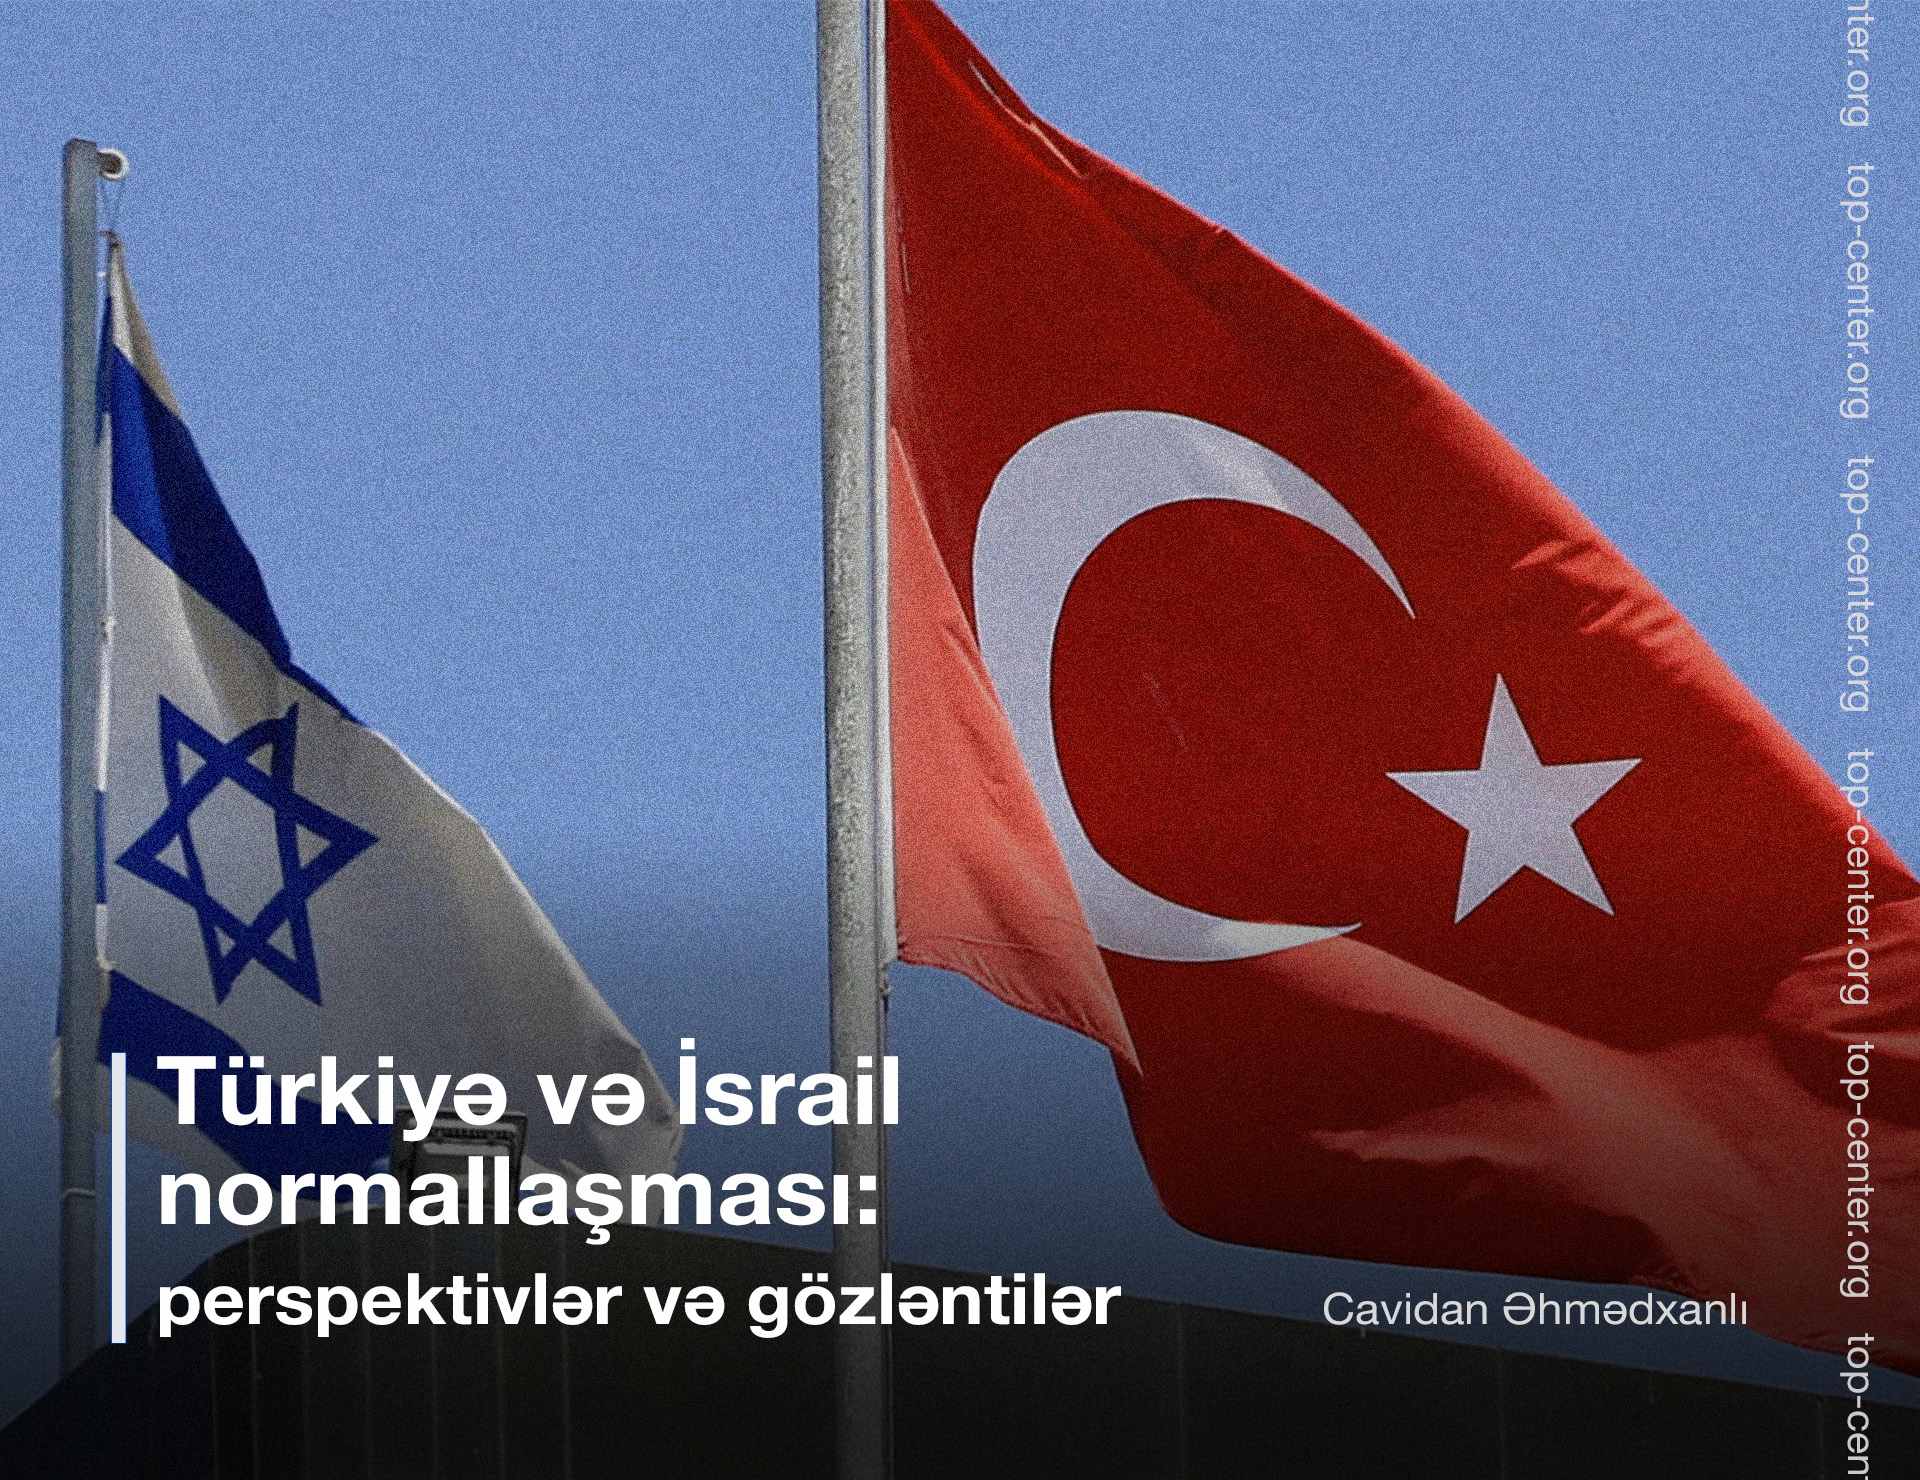 Normalization between Turkey and Israel: Prospects and expectations